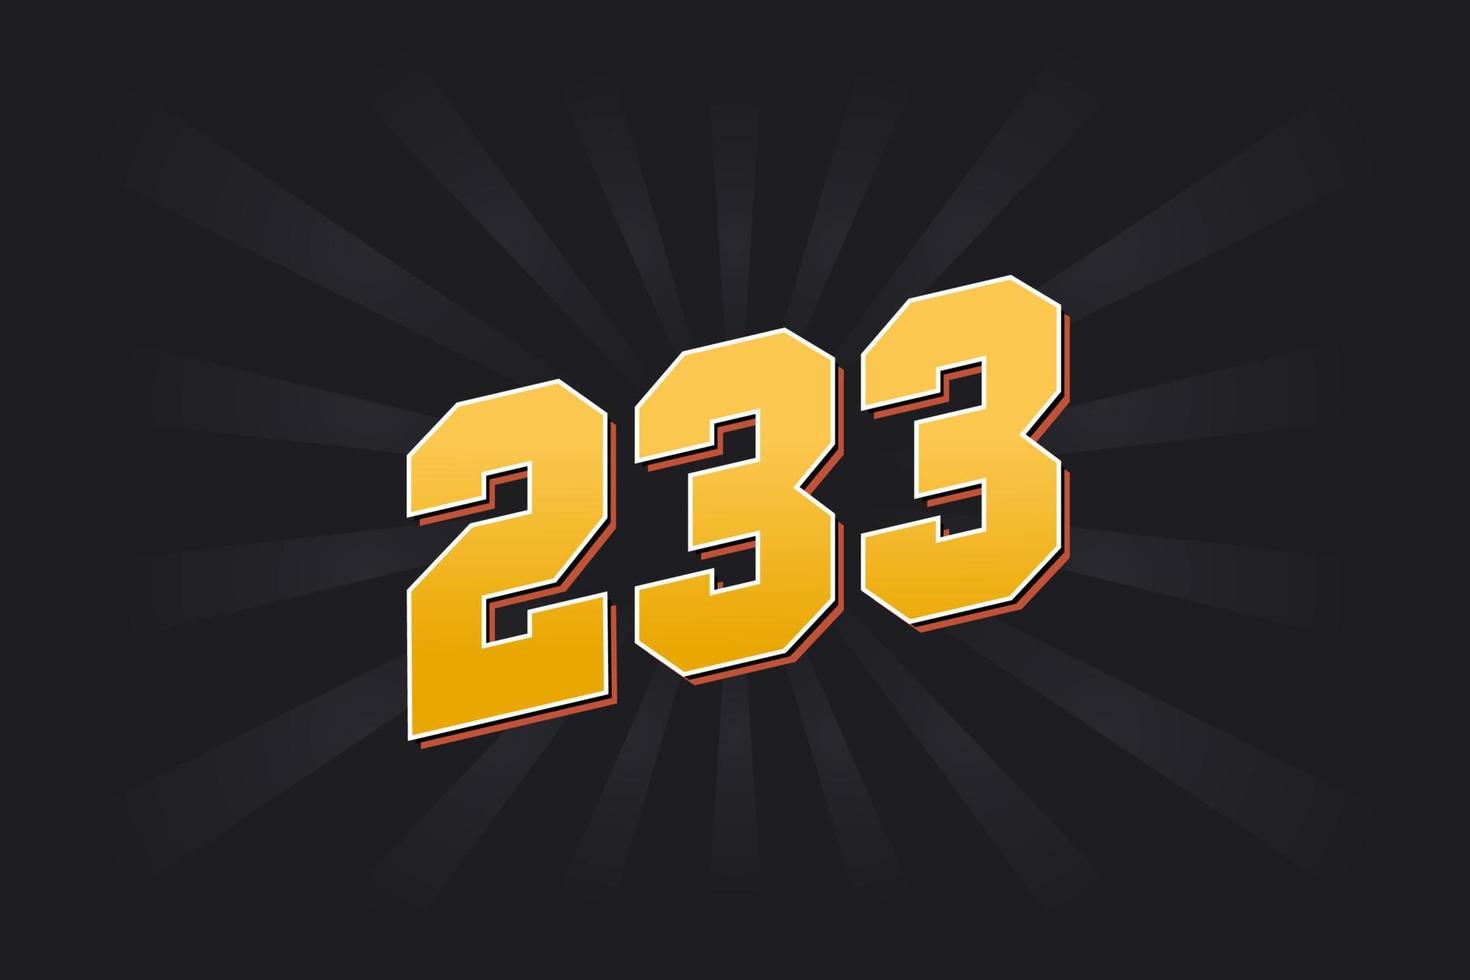 Number 233 vector font alphabet. Yellow 233 number with black background